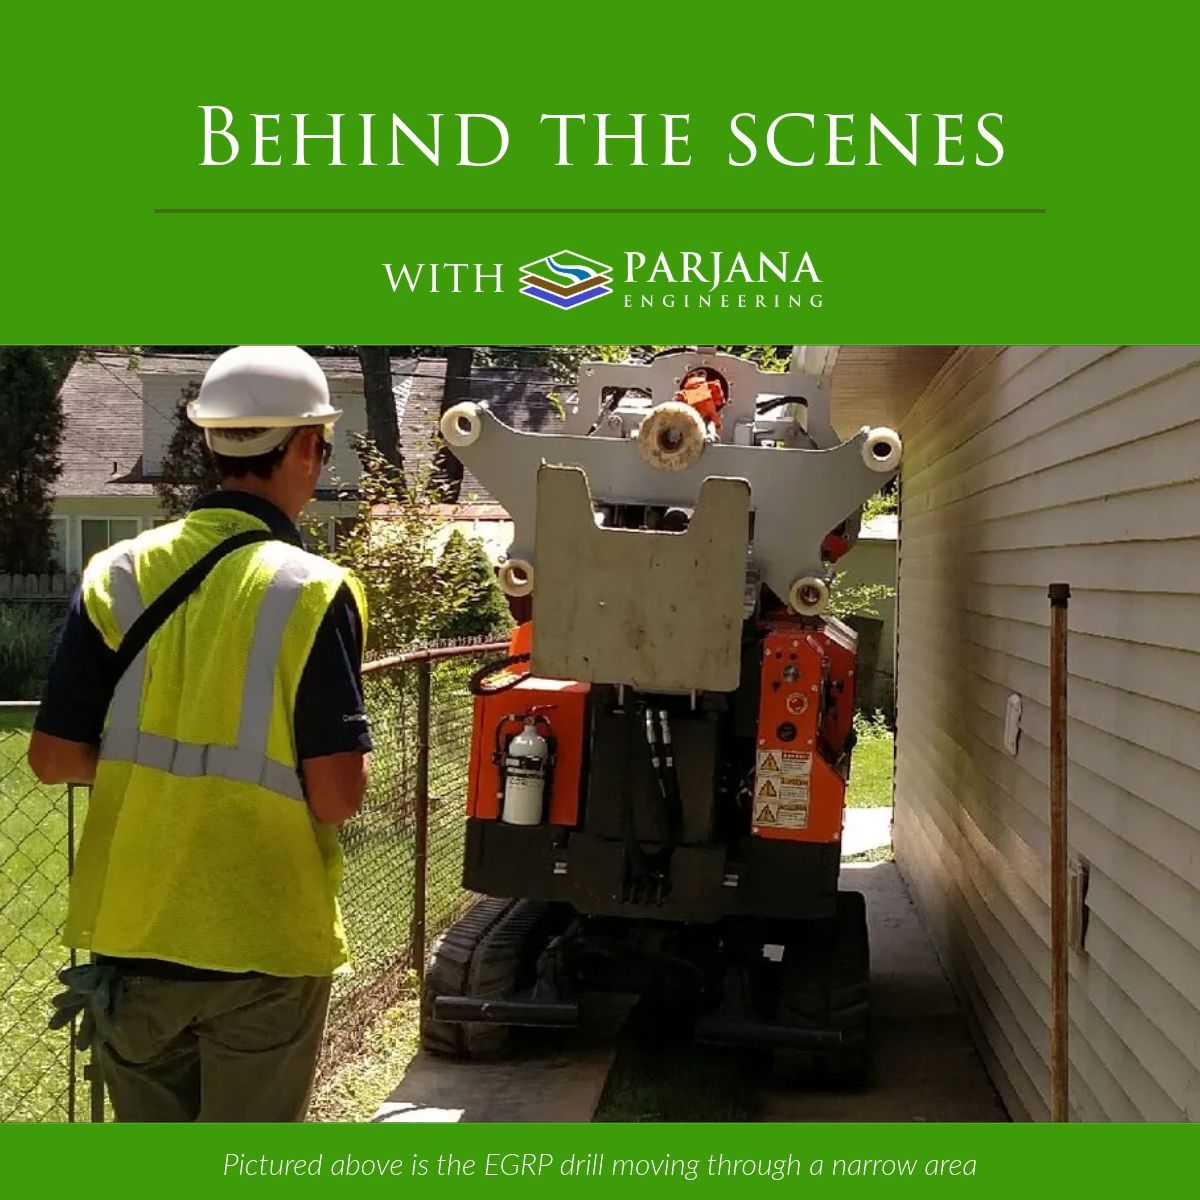 Here is a behind the scenes look at Parjana Engineering installing EGRP technology. The machine used is minimally invasive and leaves a small footprint. It can even fit through narrow side yards!

#parjanaengineering #groundwater #stormwater #EGRP #floodprevention